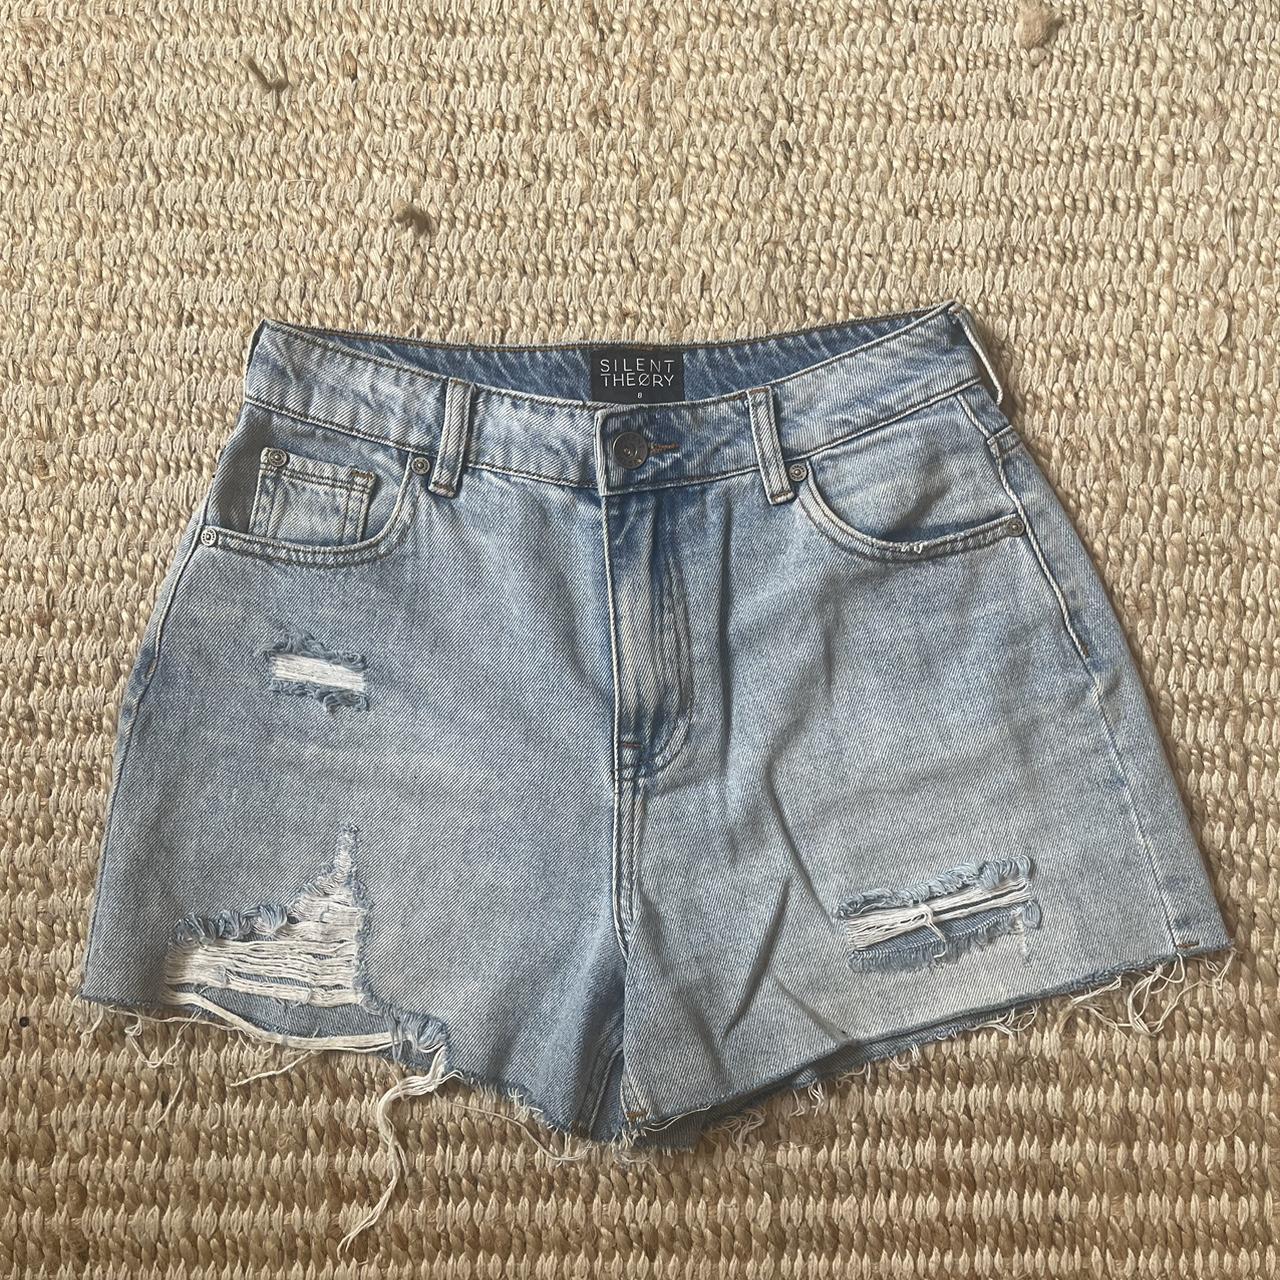 Silent Theory - Denim shorts Worn once - Size... - Depop